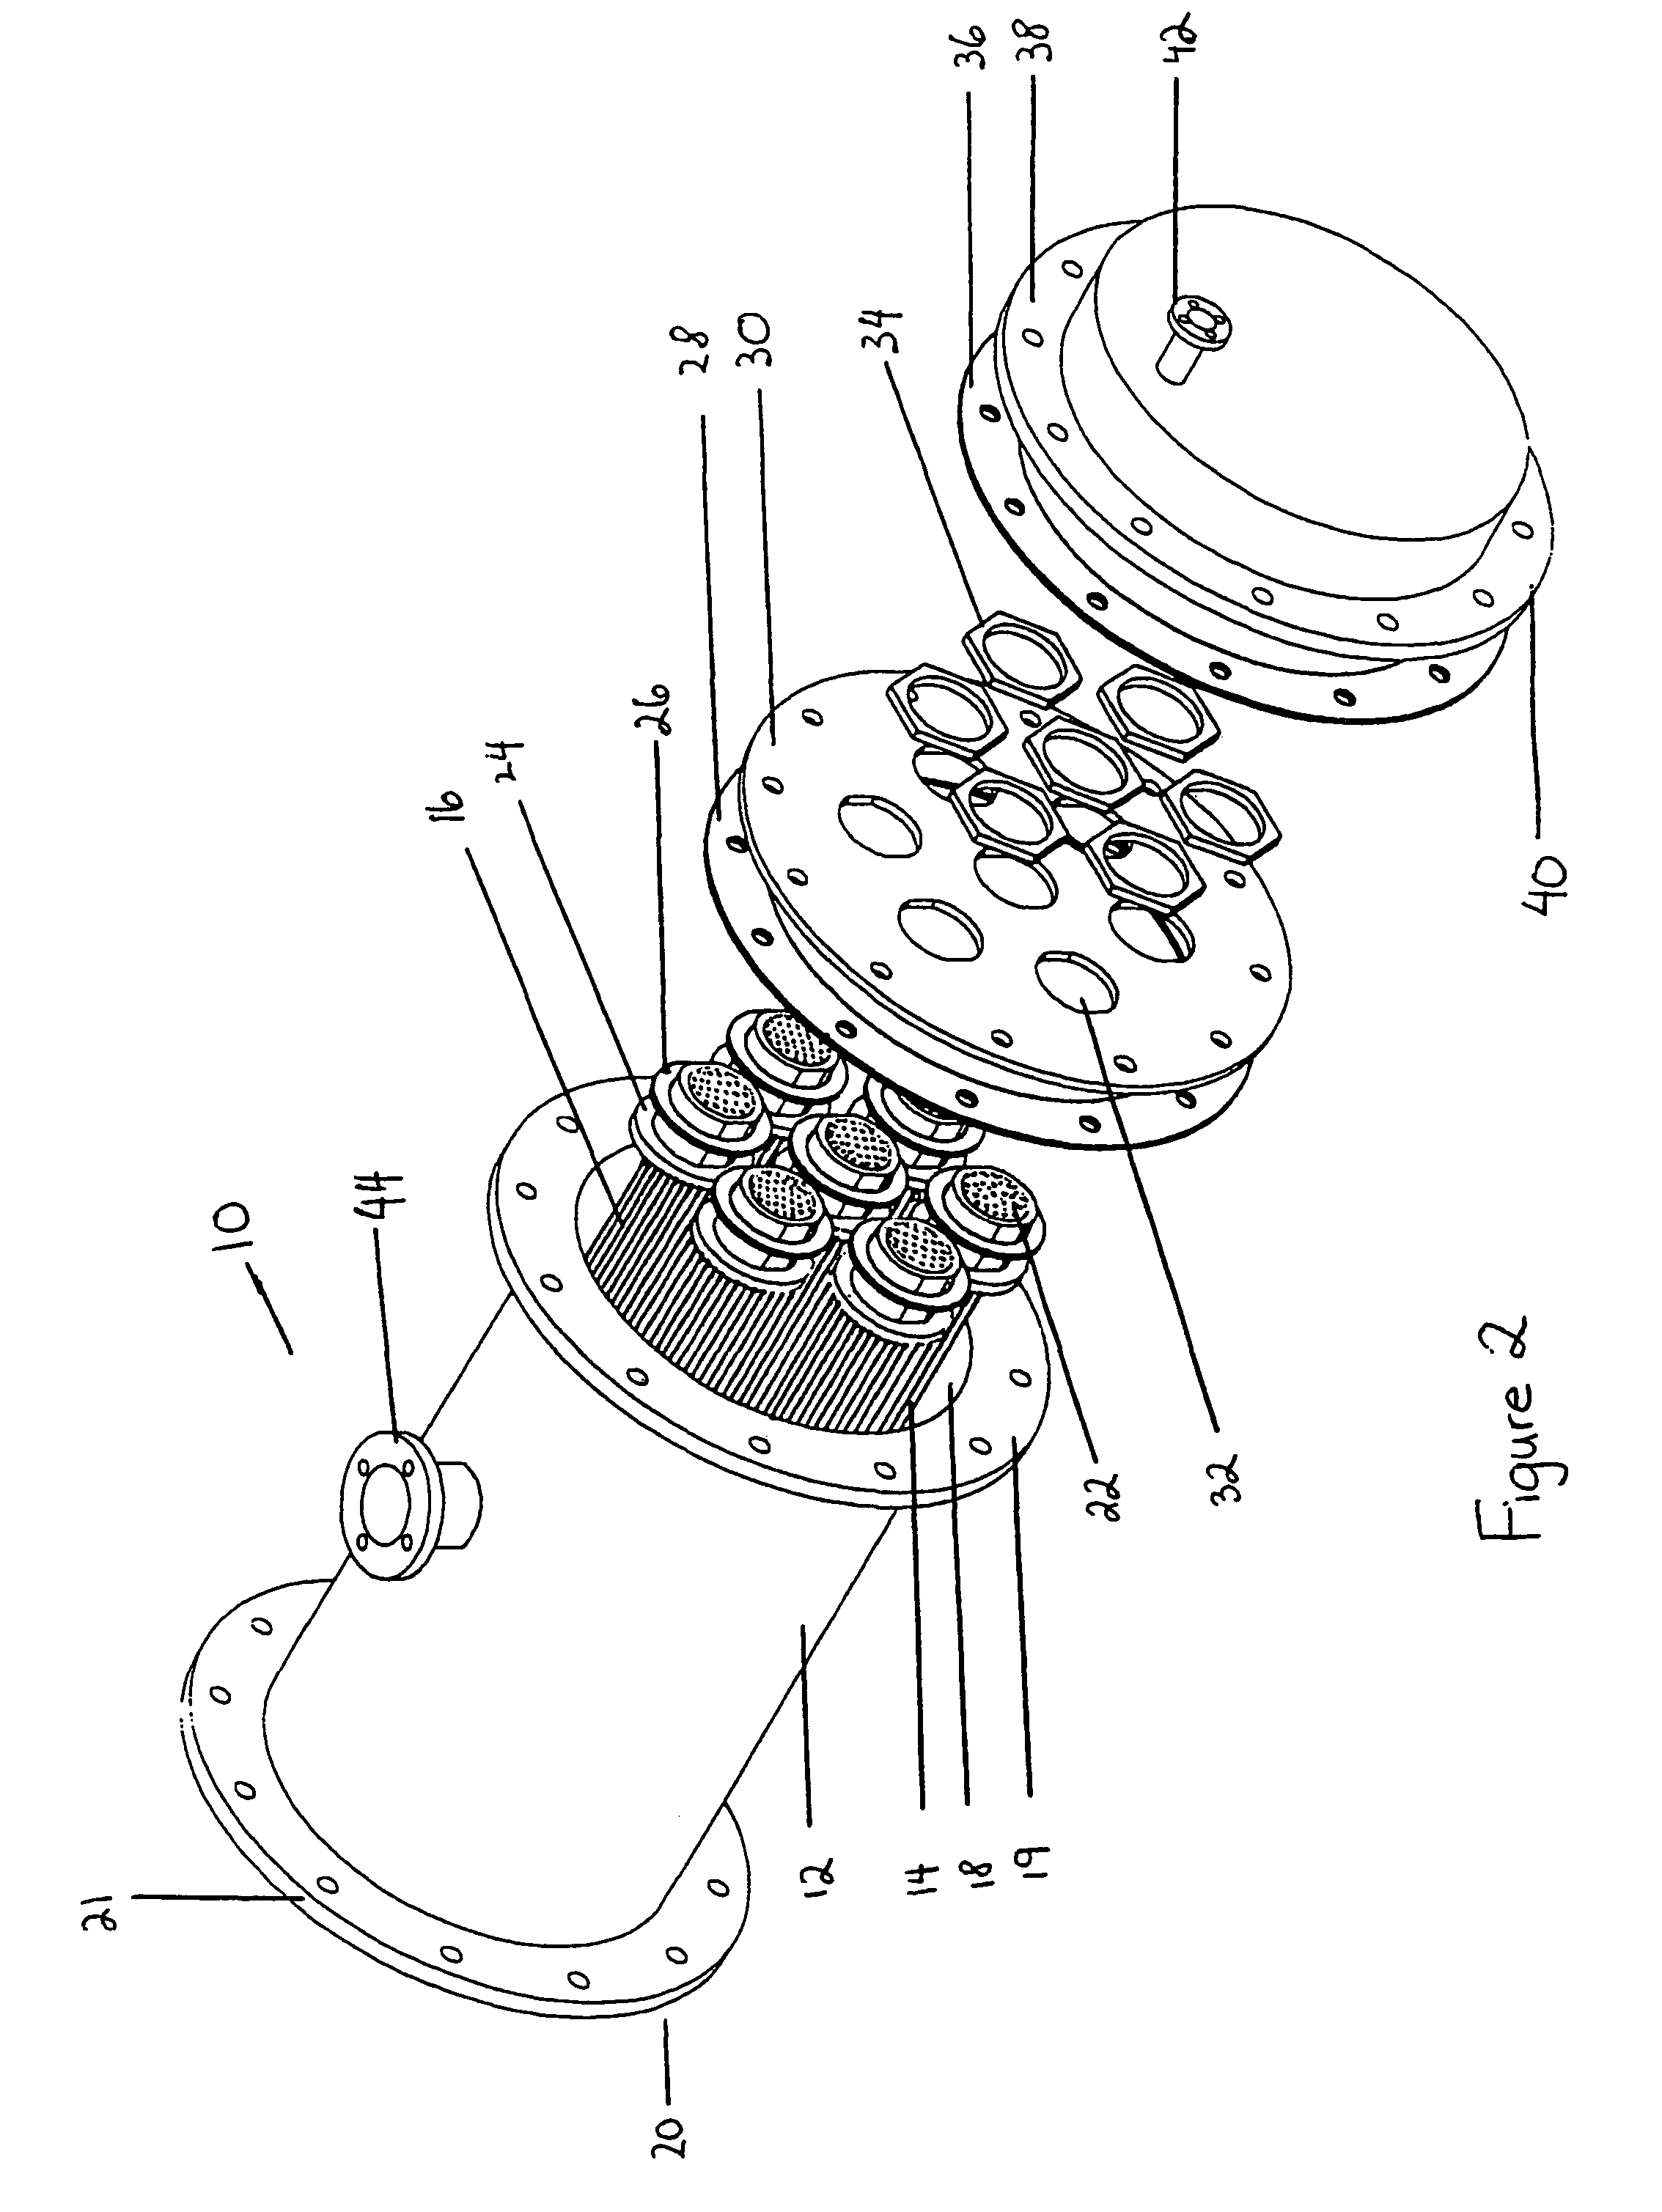 Membrane-assisted fluid separation apparatus and method